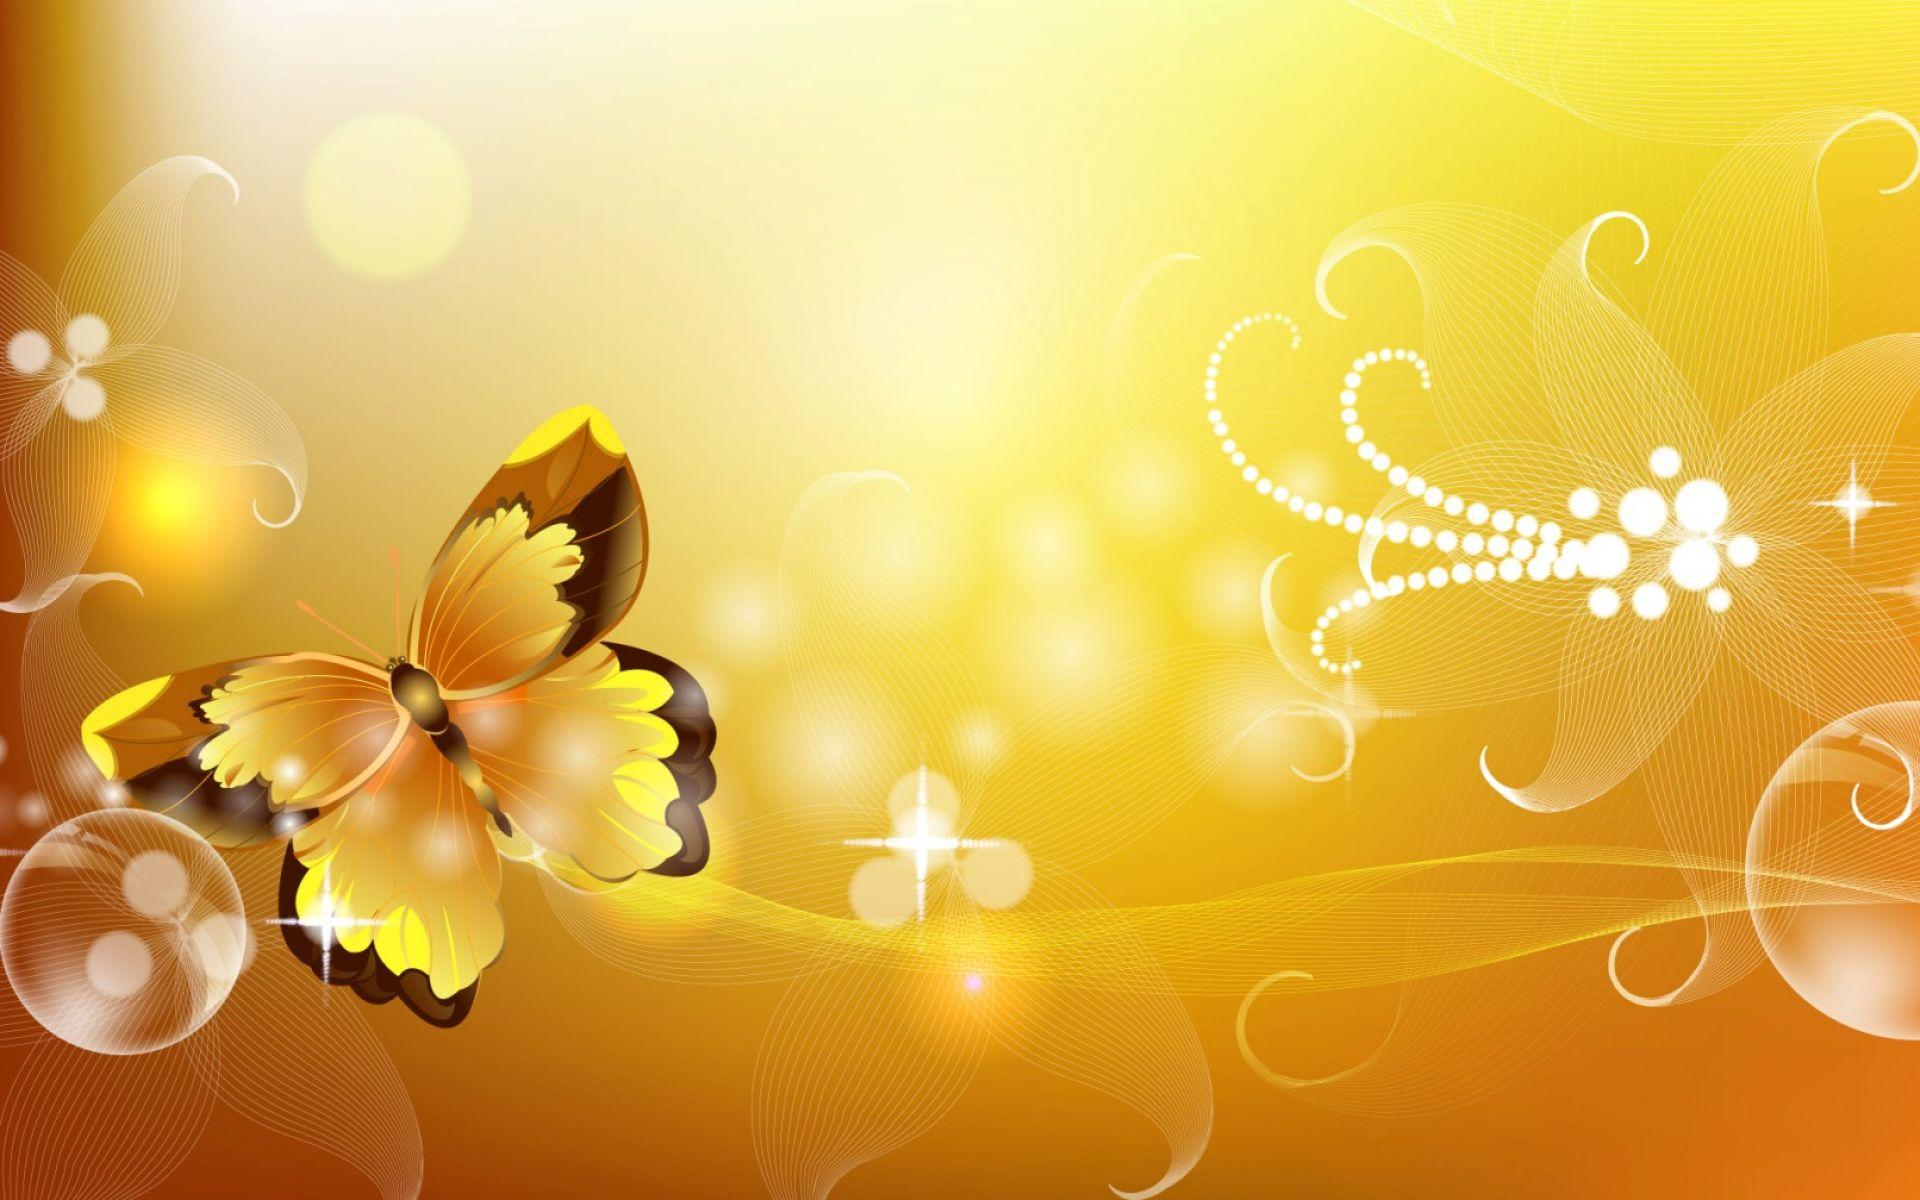 Golden Butterfly and Abstract Wallpaper. All is Wall